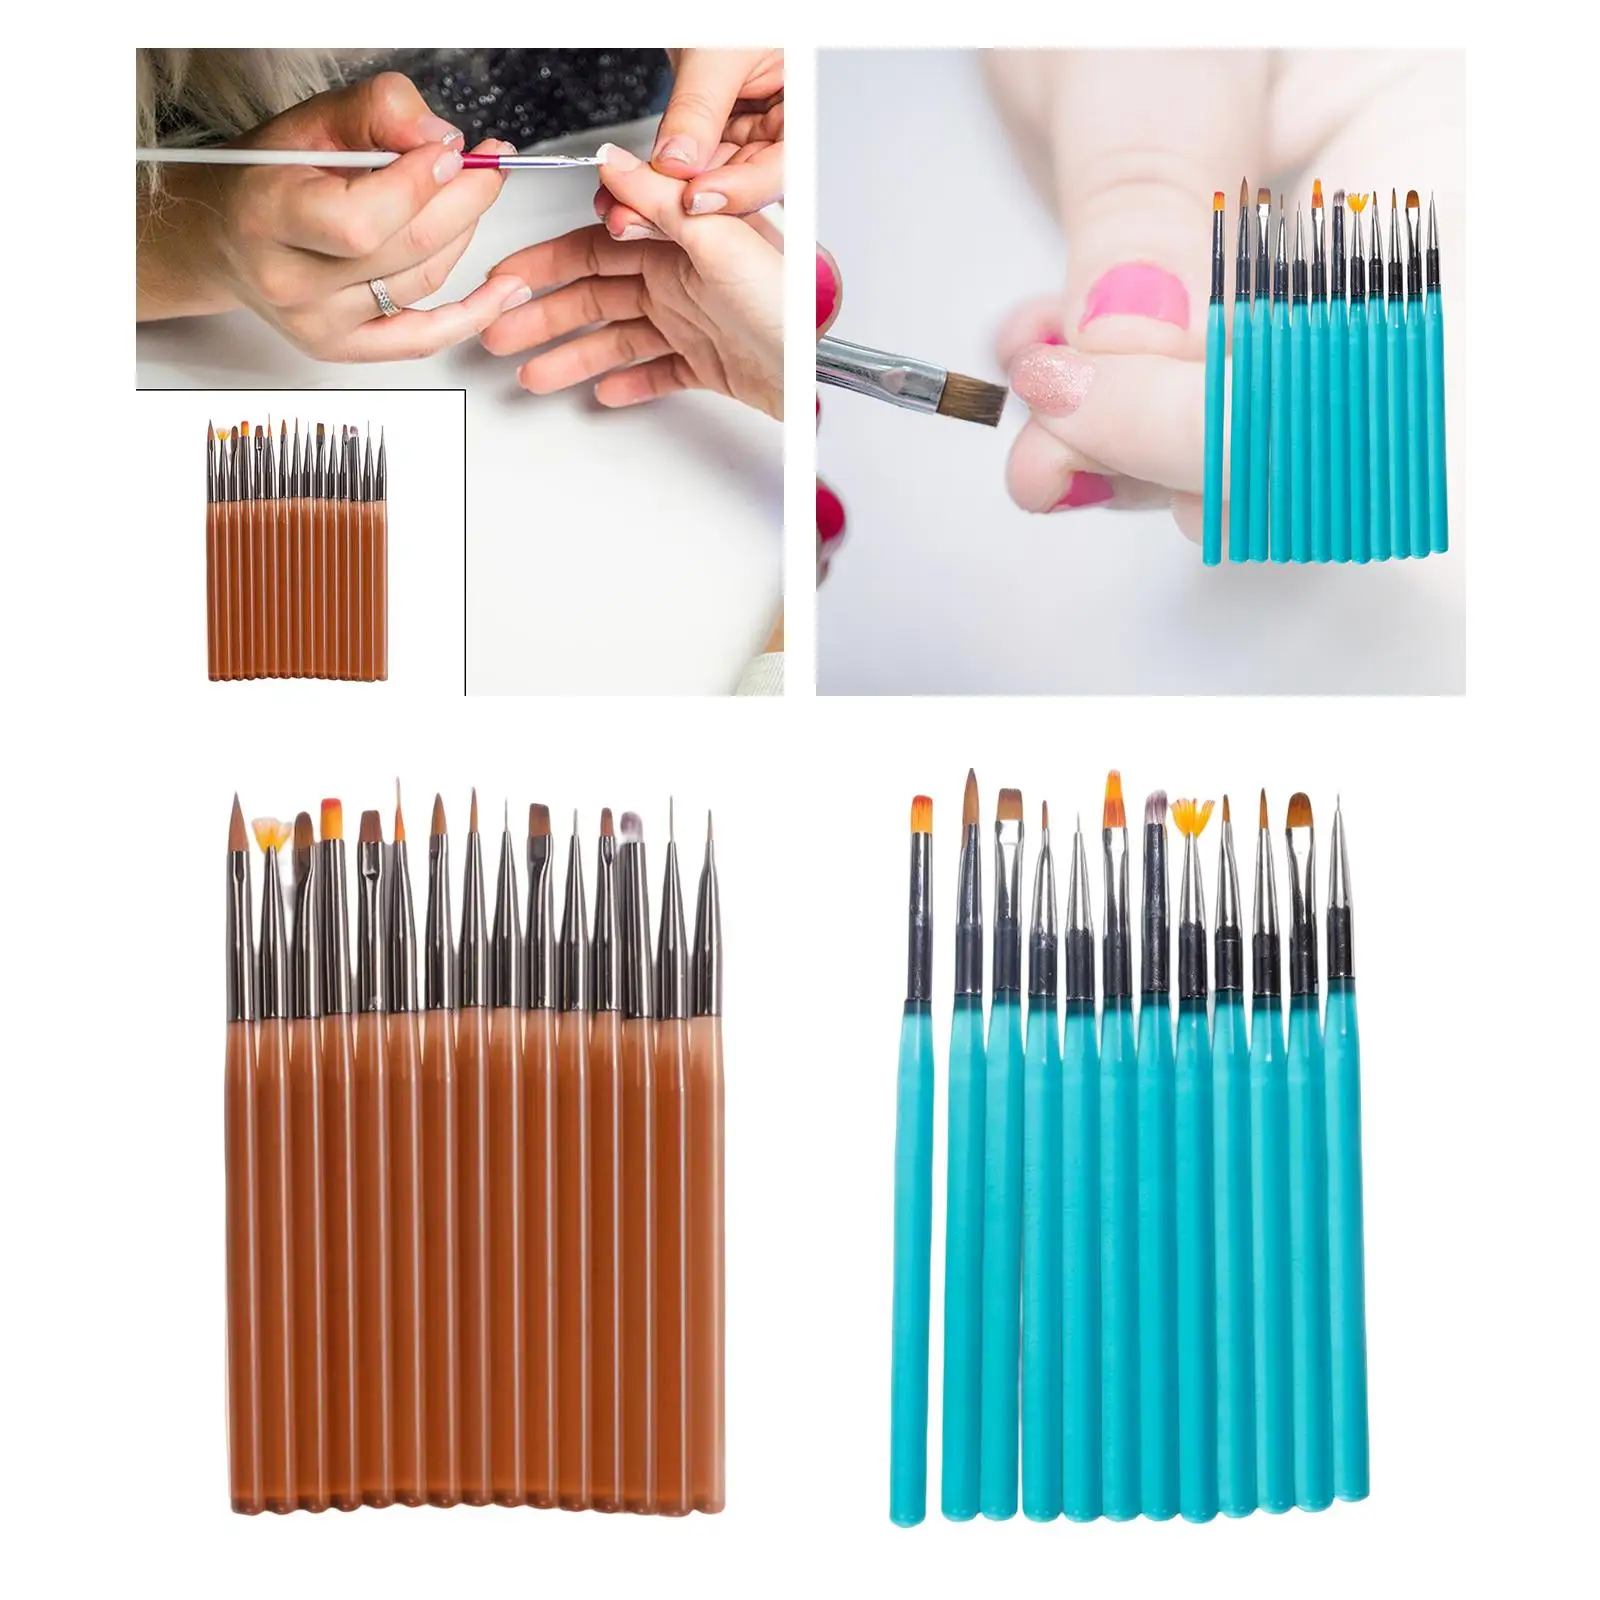 Nail Art Brushes Set for Women Nail Brushes Drawing Tools Nail Painting Brushes Nail Liner Brushes Lightweight for DIY Manicure